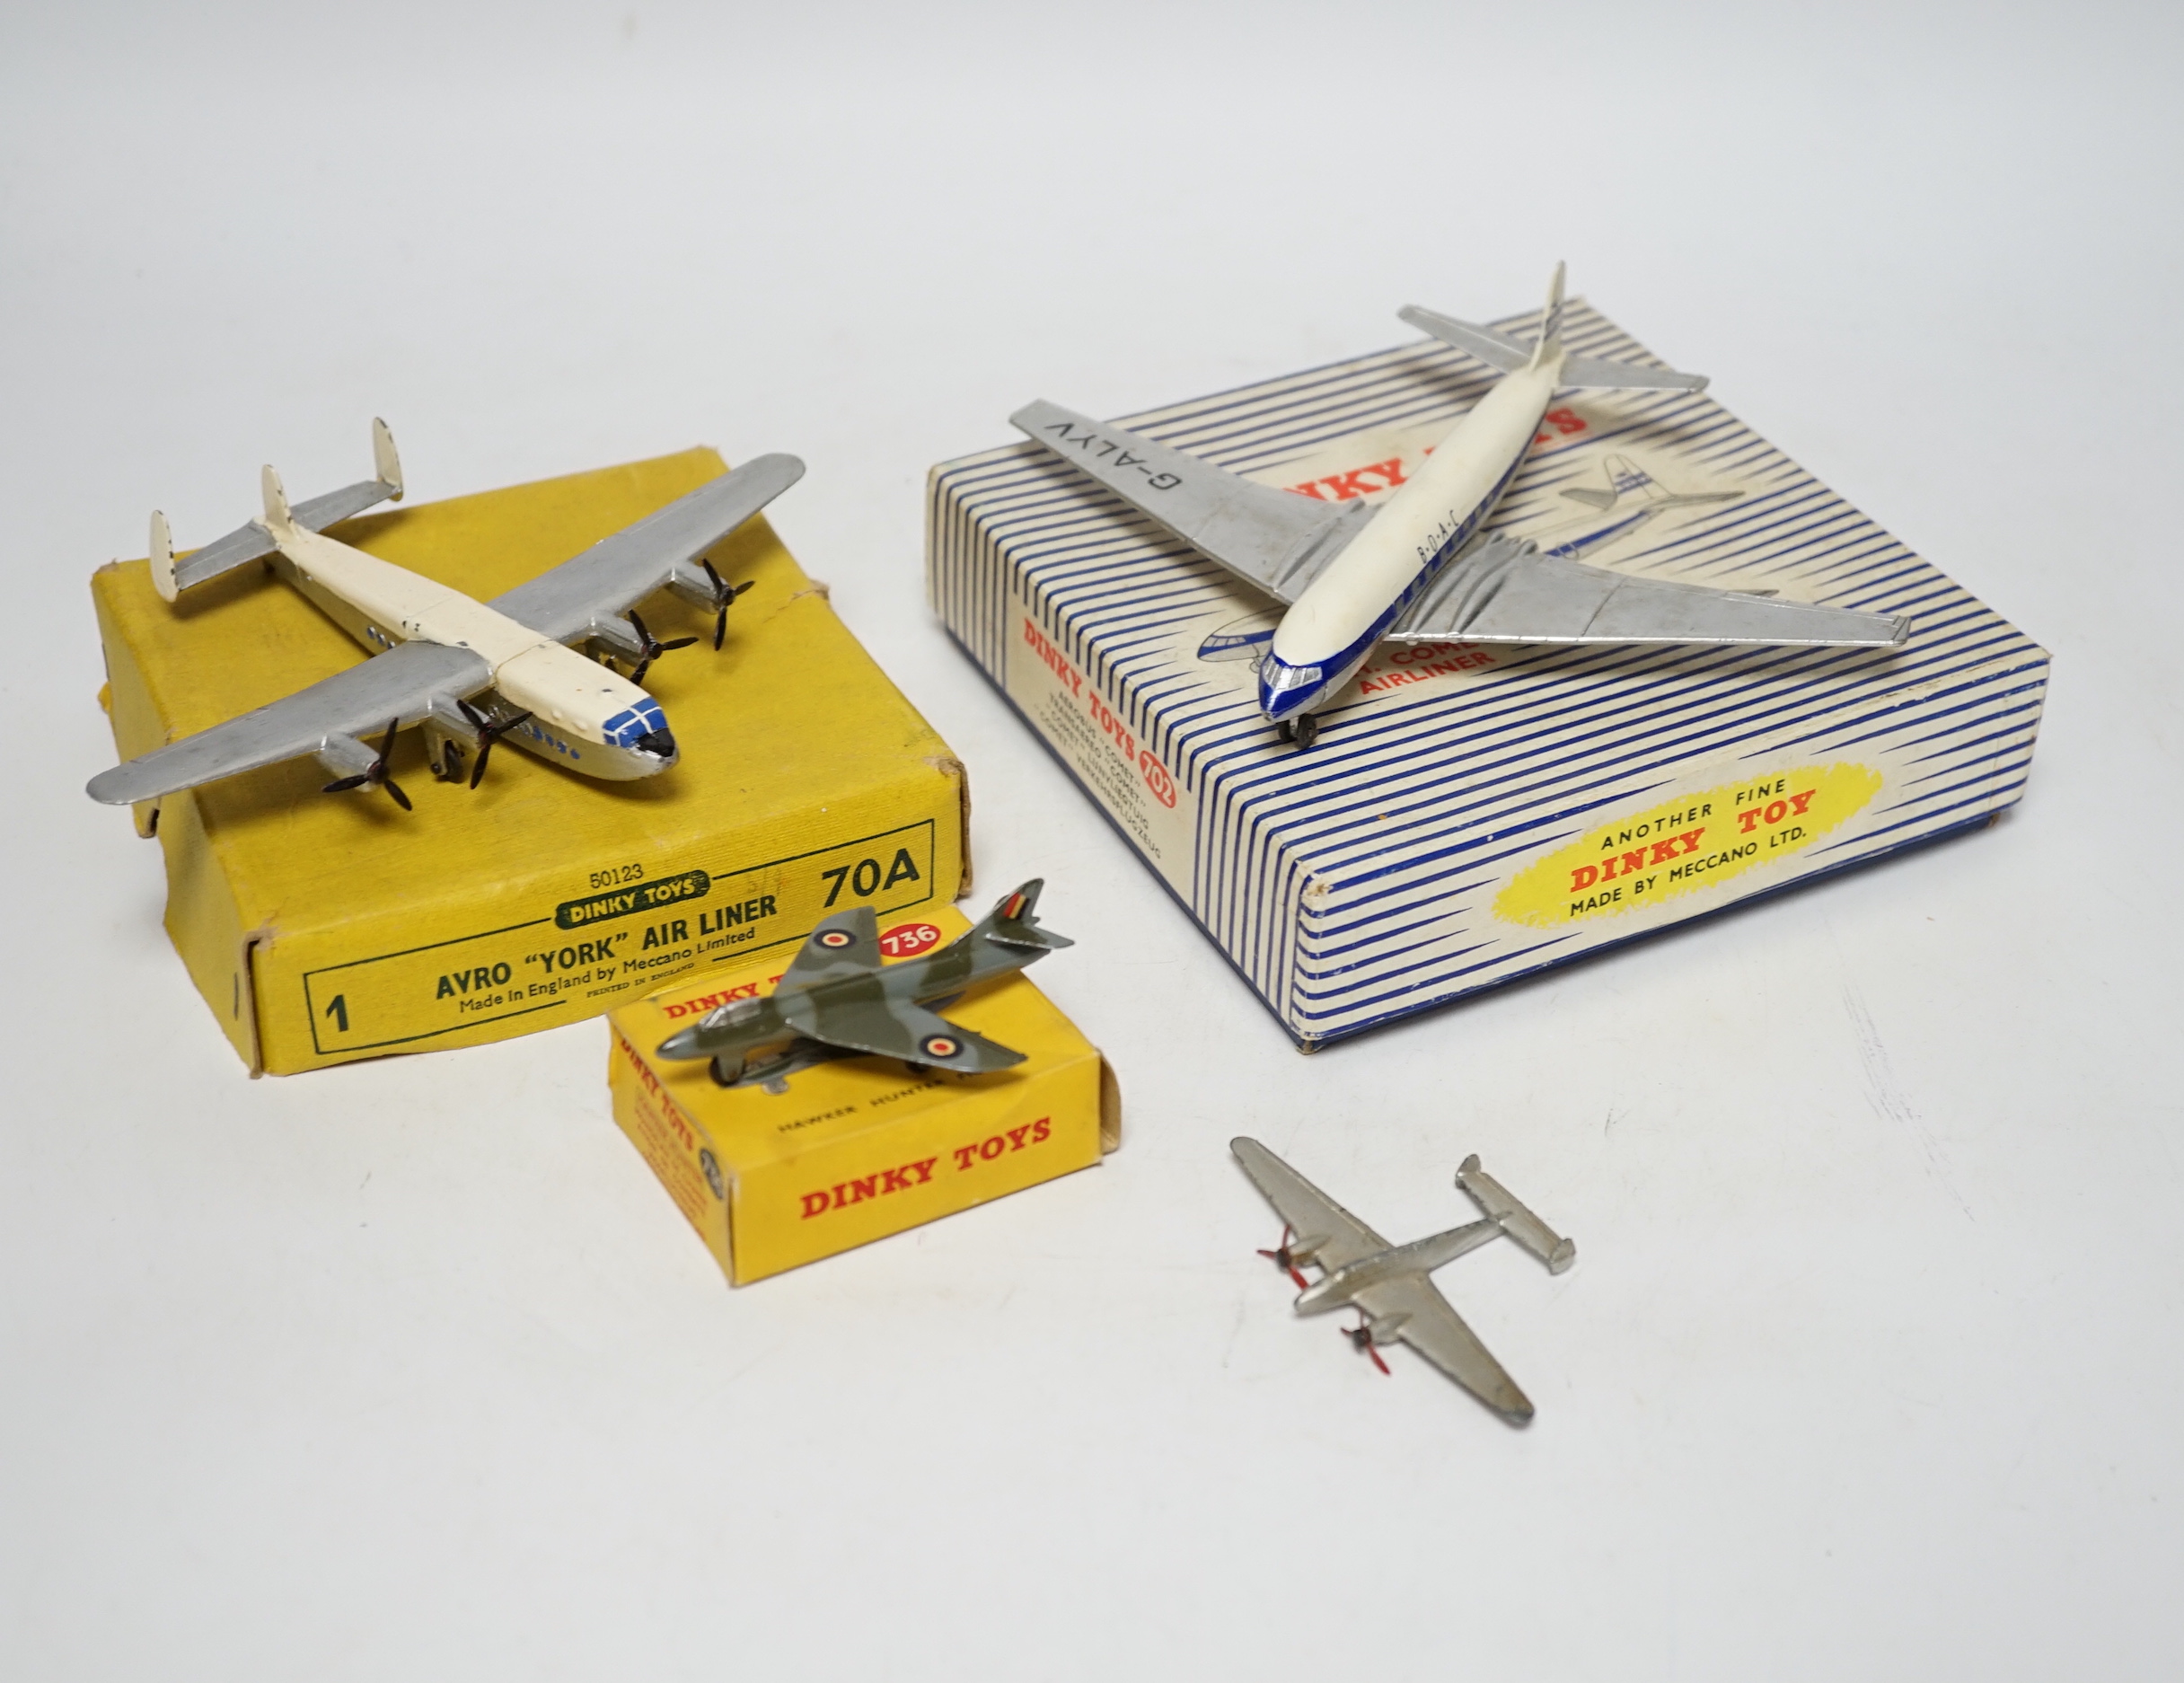 Four Dinky Toys aircraft; three boxed examples including (702) DH Comet Airliner, (70A) Avro York Airliner, (736) Hawker Hunter Fighter, and an unboxed Twin Engined Fighter